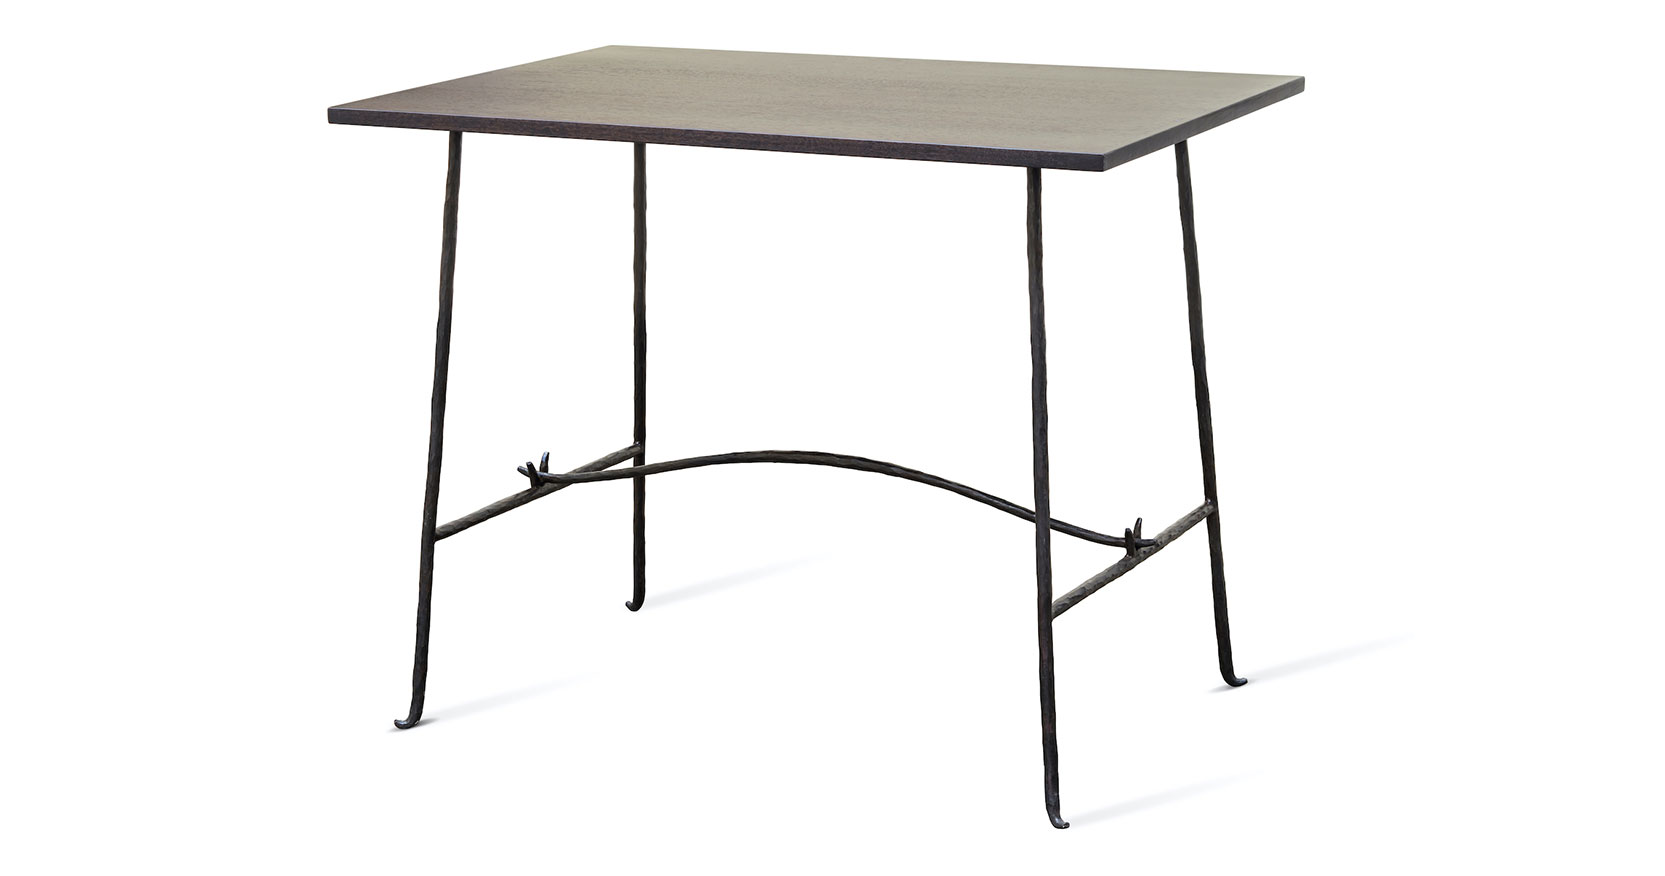 Garouste Bonetti, minimalist rectangular high table, dark wood top, simple black wrought iron legs, with two small V-shaped ornaments on each side